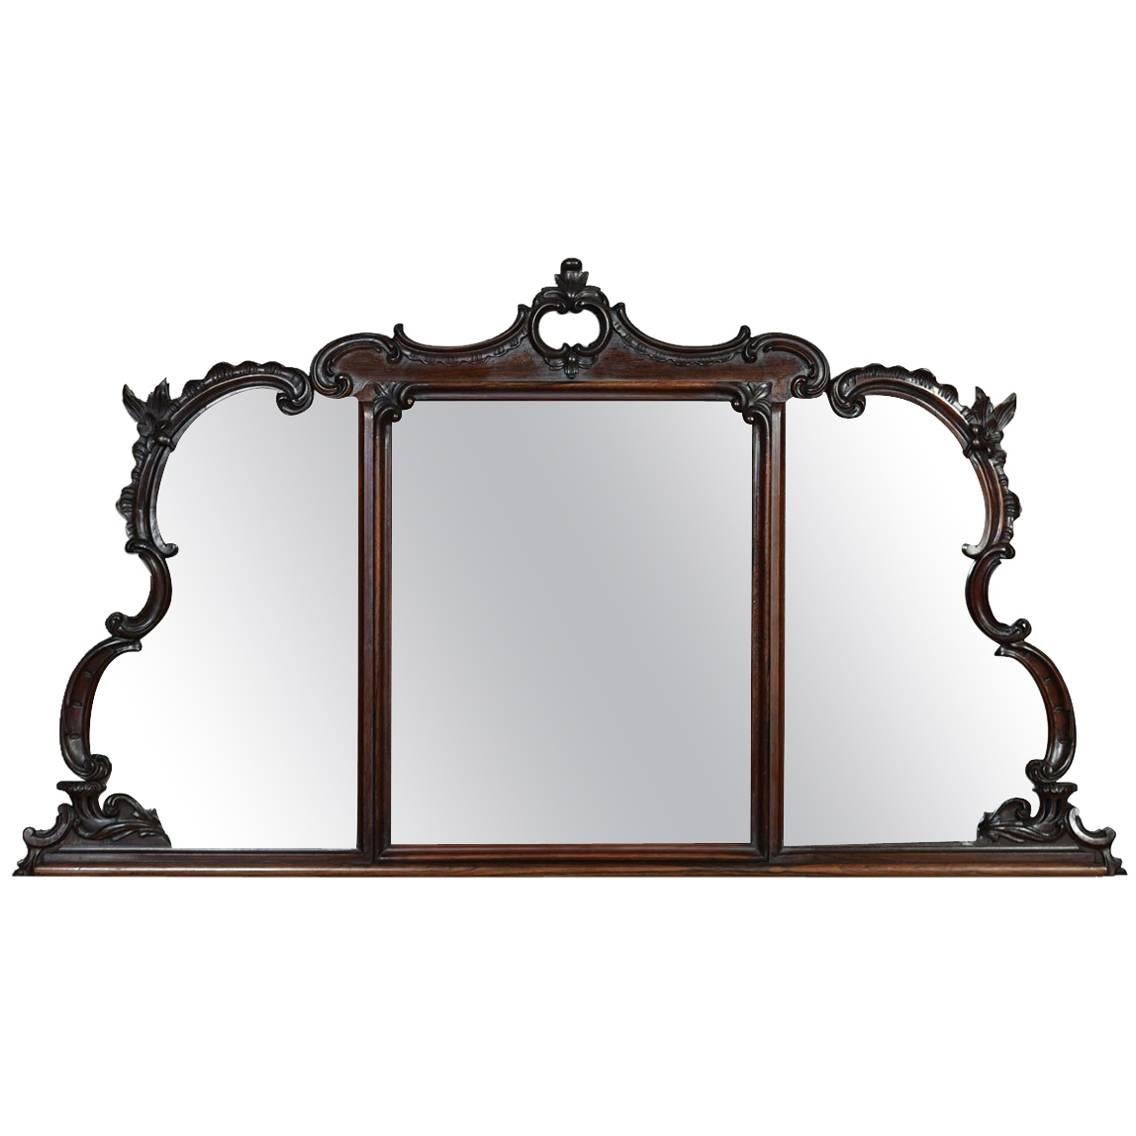 Victorian Carved Overmantel Rosewood Wall Mirror